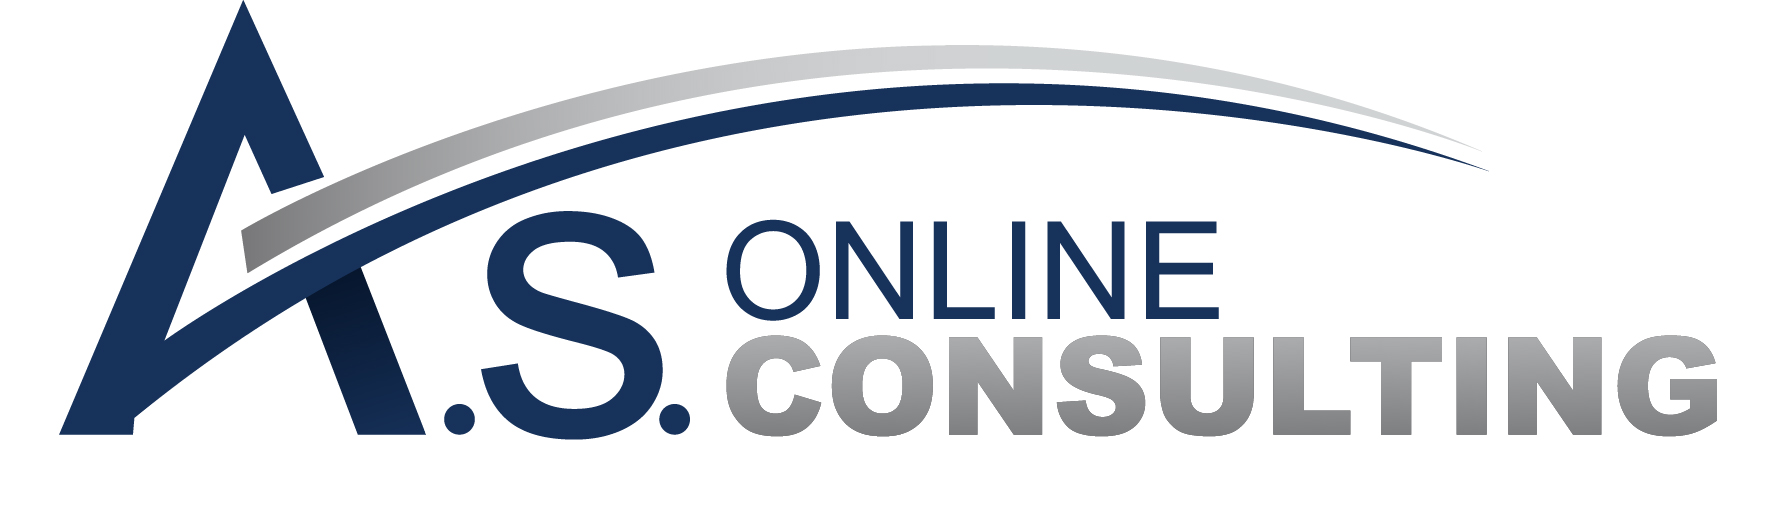 AS Online Consulting, Inc.